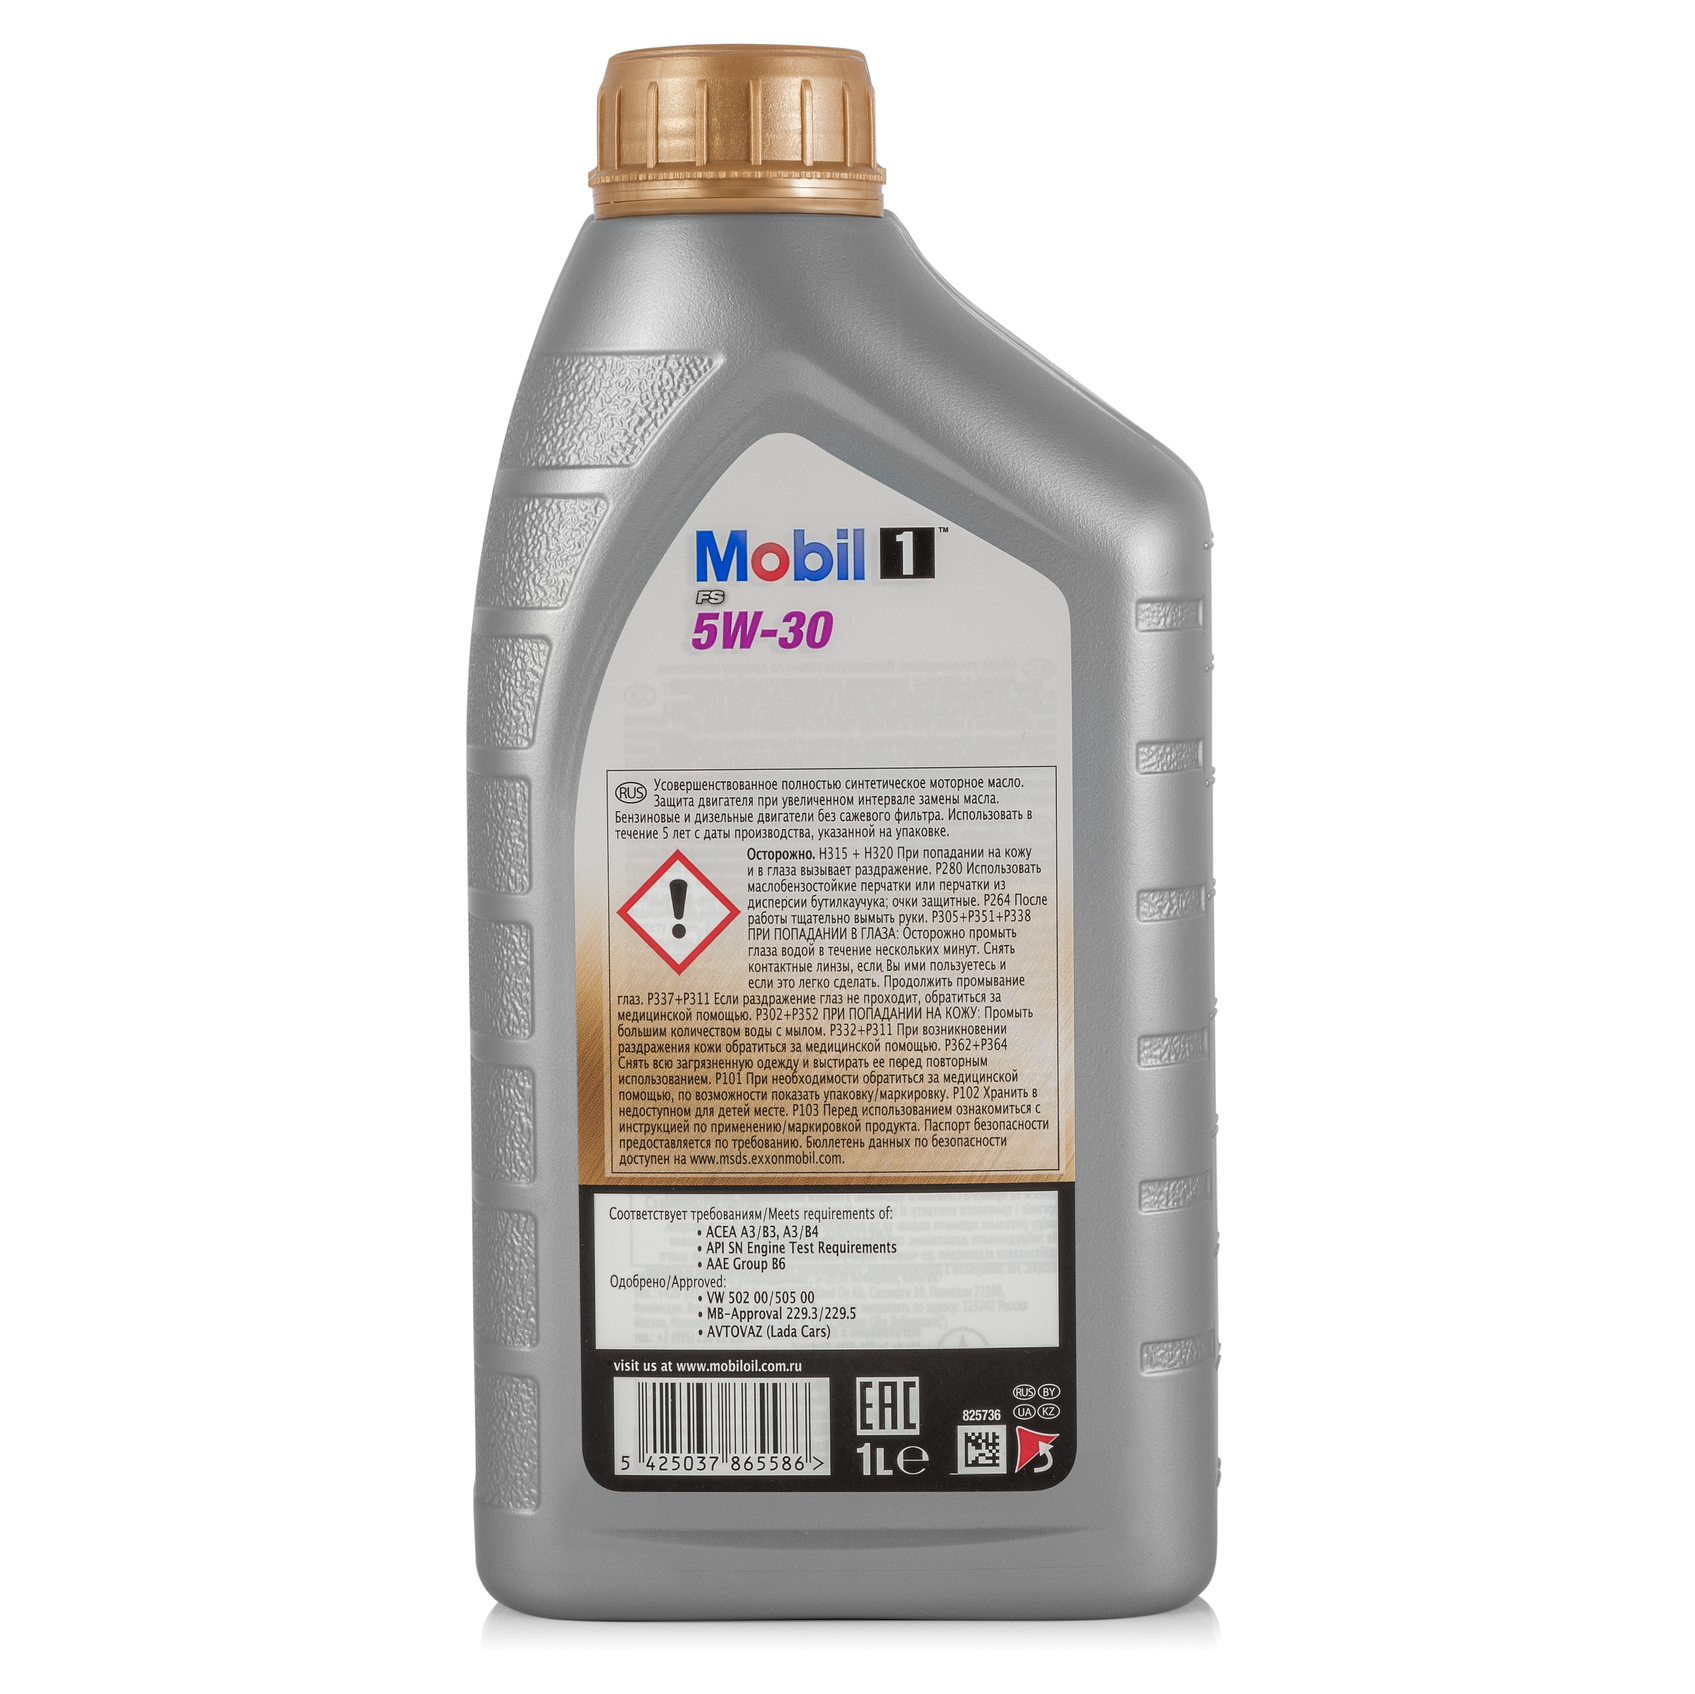  Моторное масло Mobil 1 Full Synthetic 5W-30, 1л